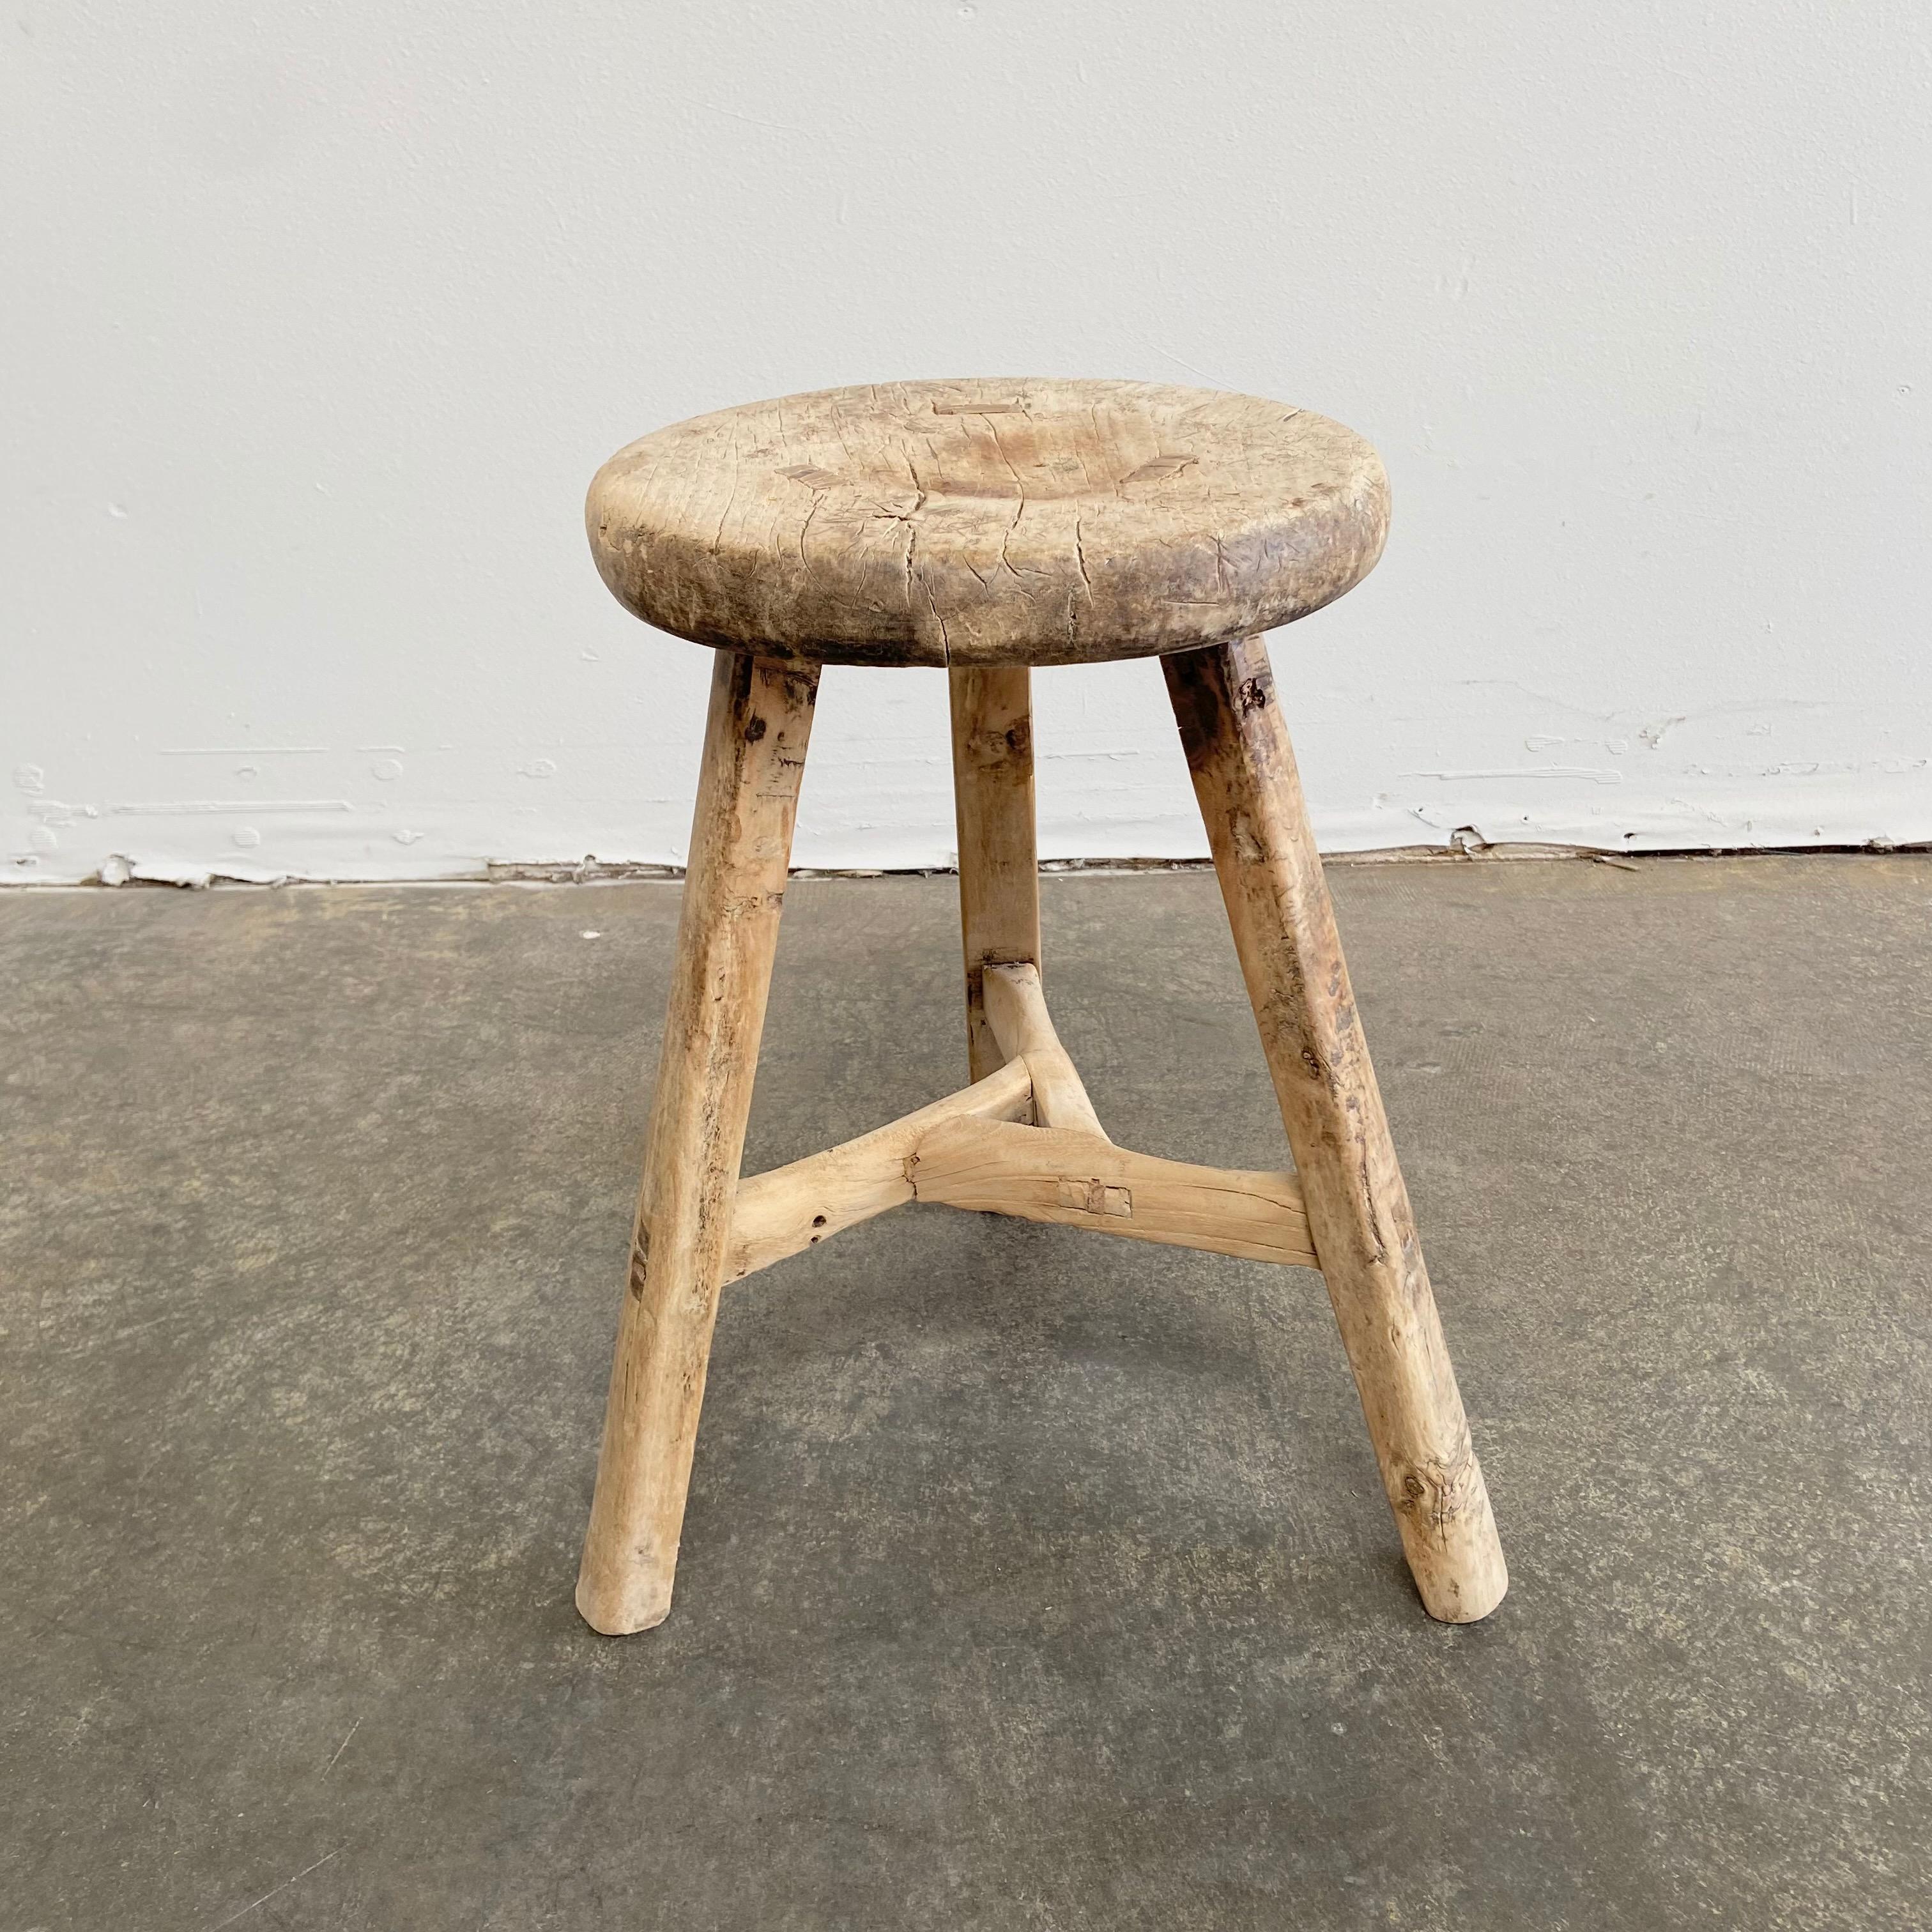 Vintage antique elm wood stool These are the real vintage antique elm wood stools! Beautiful antique patina, with weathering and age, these are solid and sturdy ready for daily use, use as a table, stool, drink table, they are great for any space.